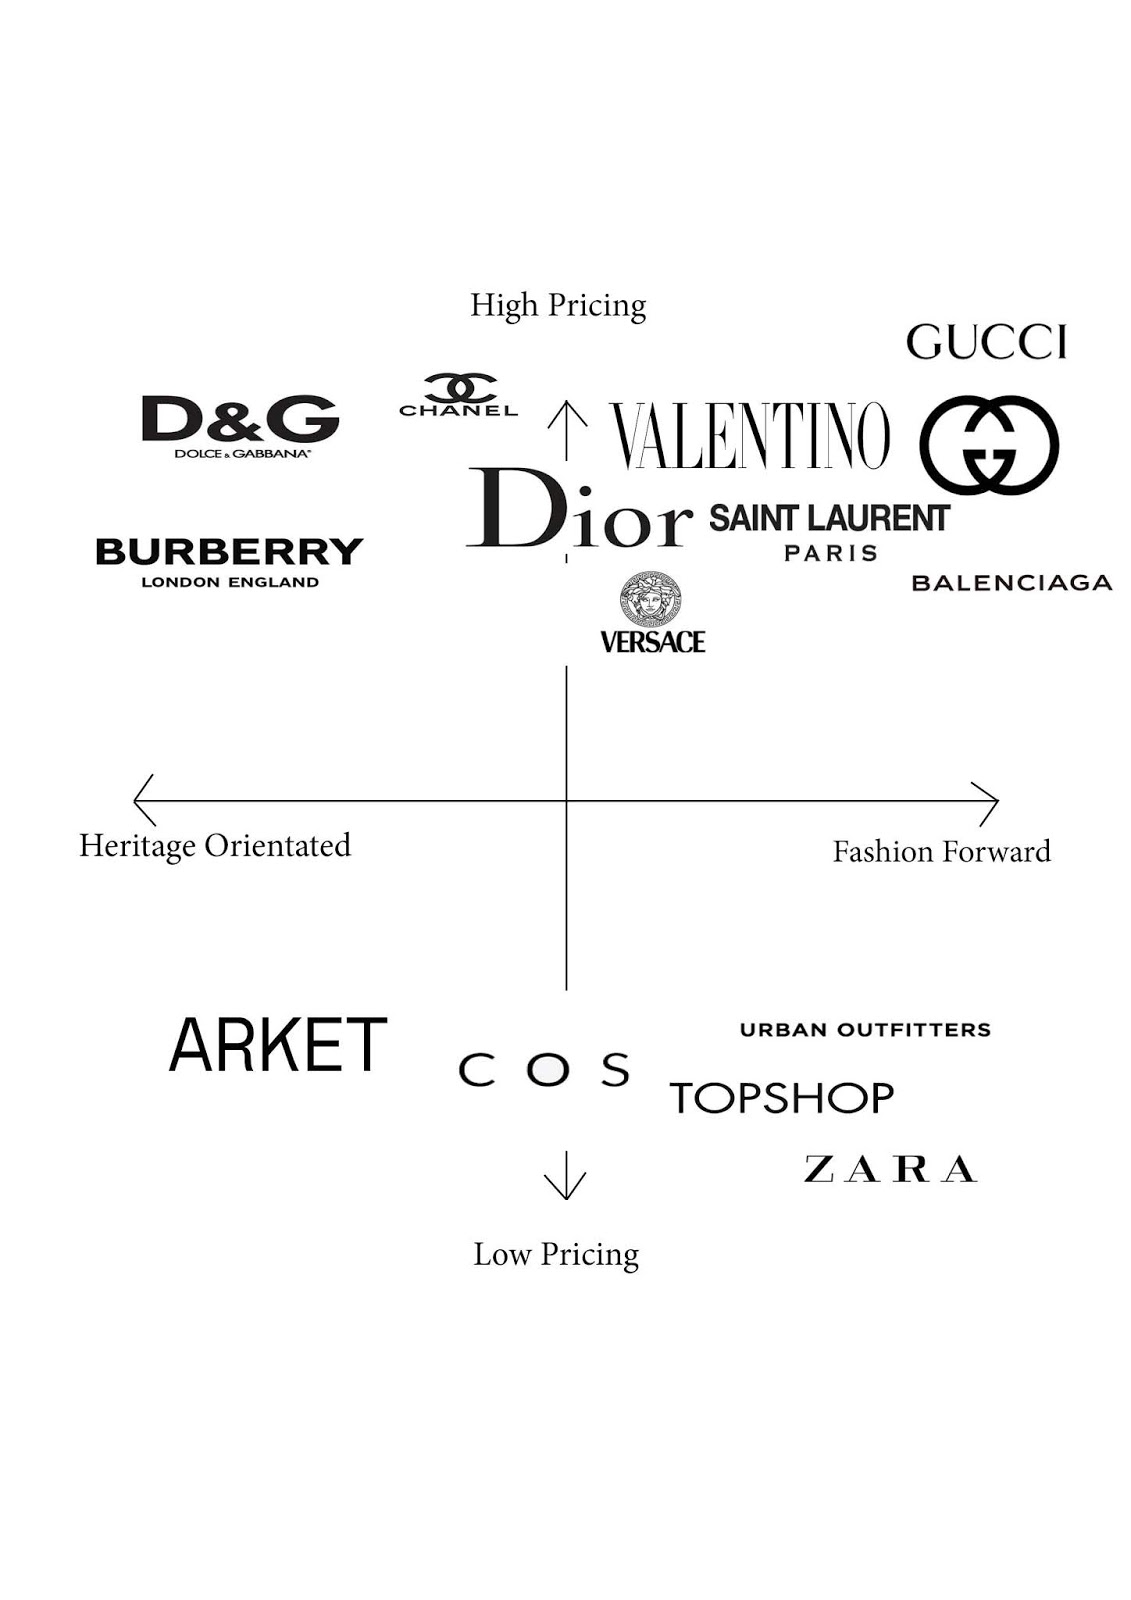 dolce and gabbana competitors